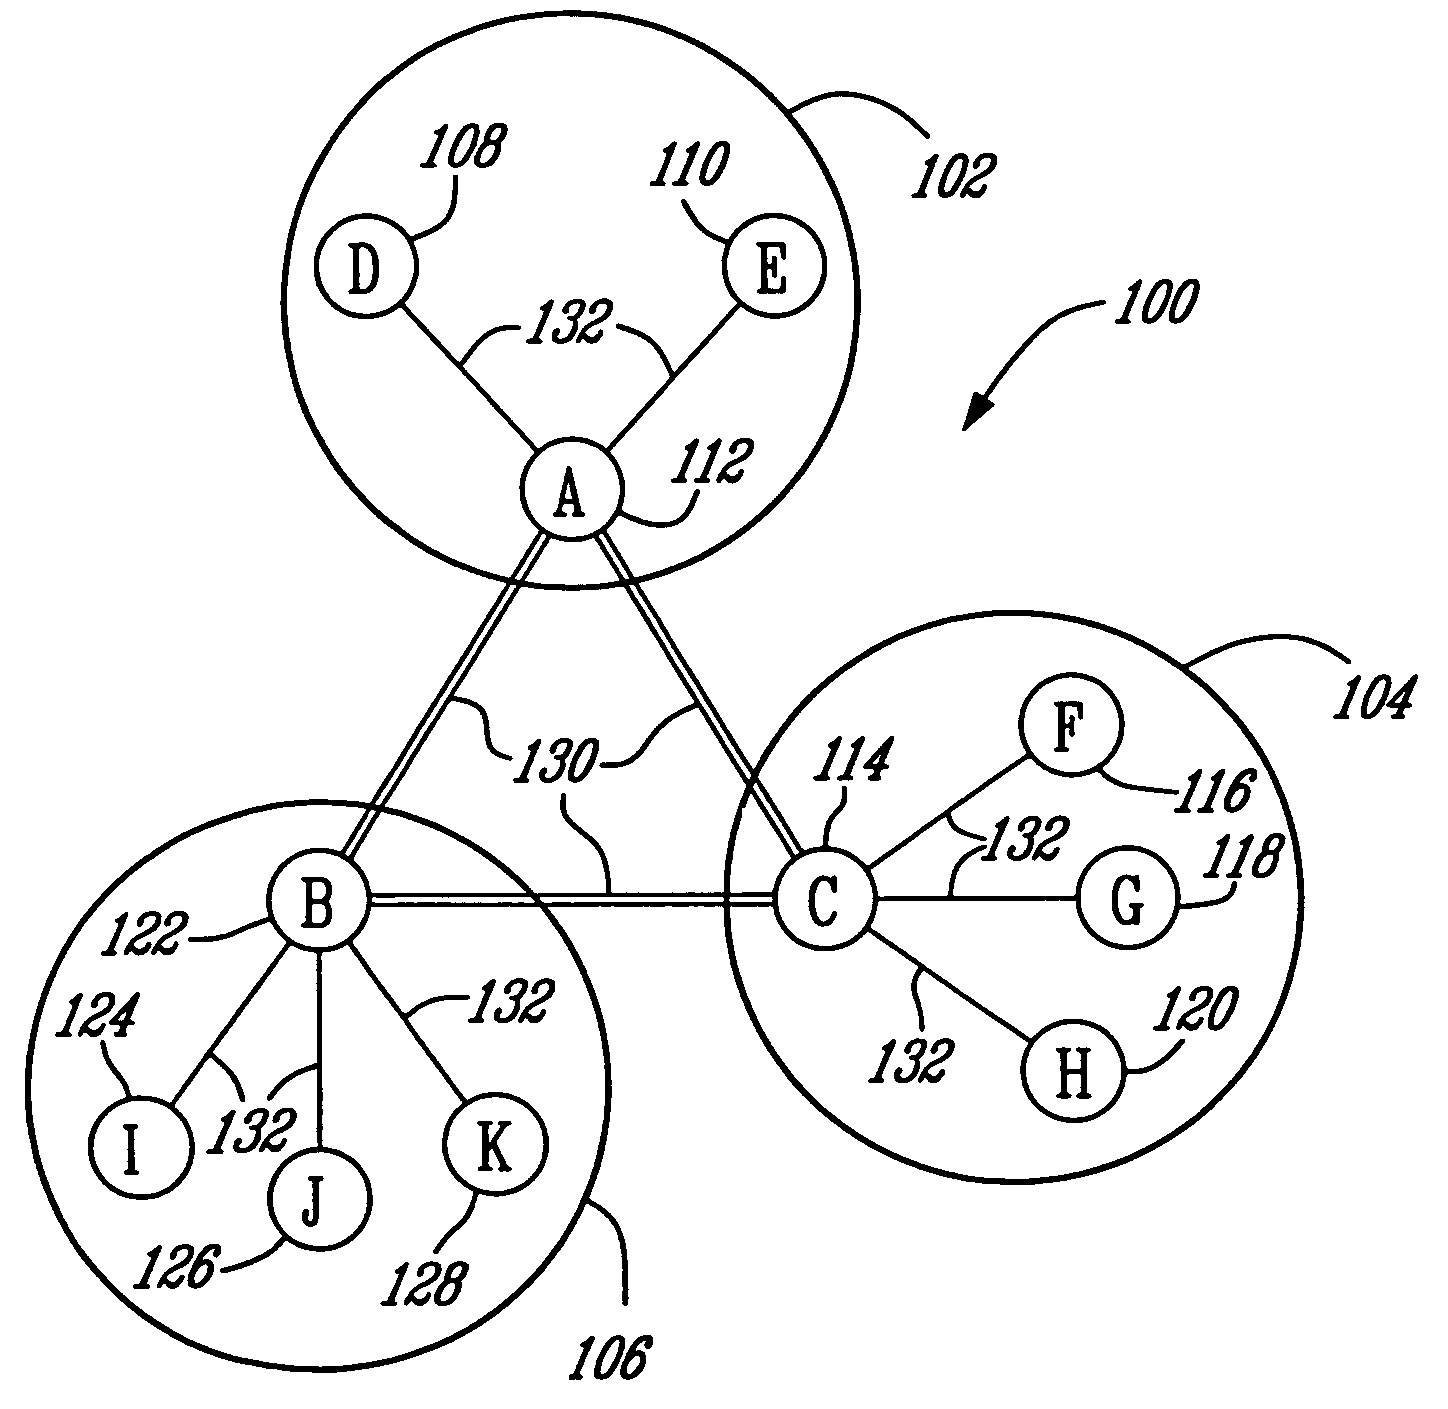 Cluster of terminals and ad-hoc network for cluster-based multi-party conferencing